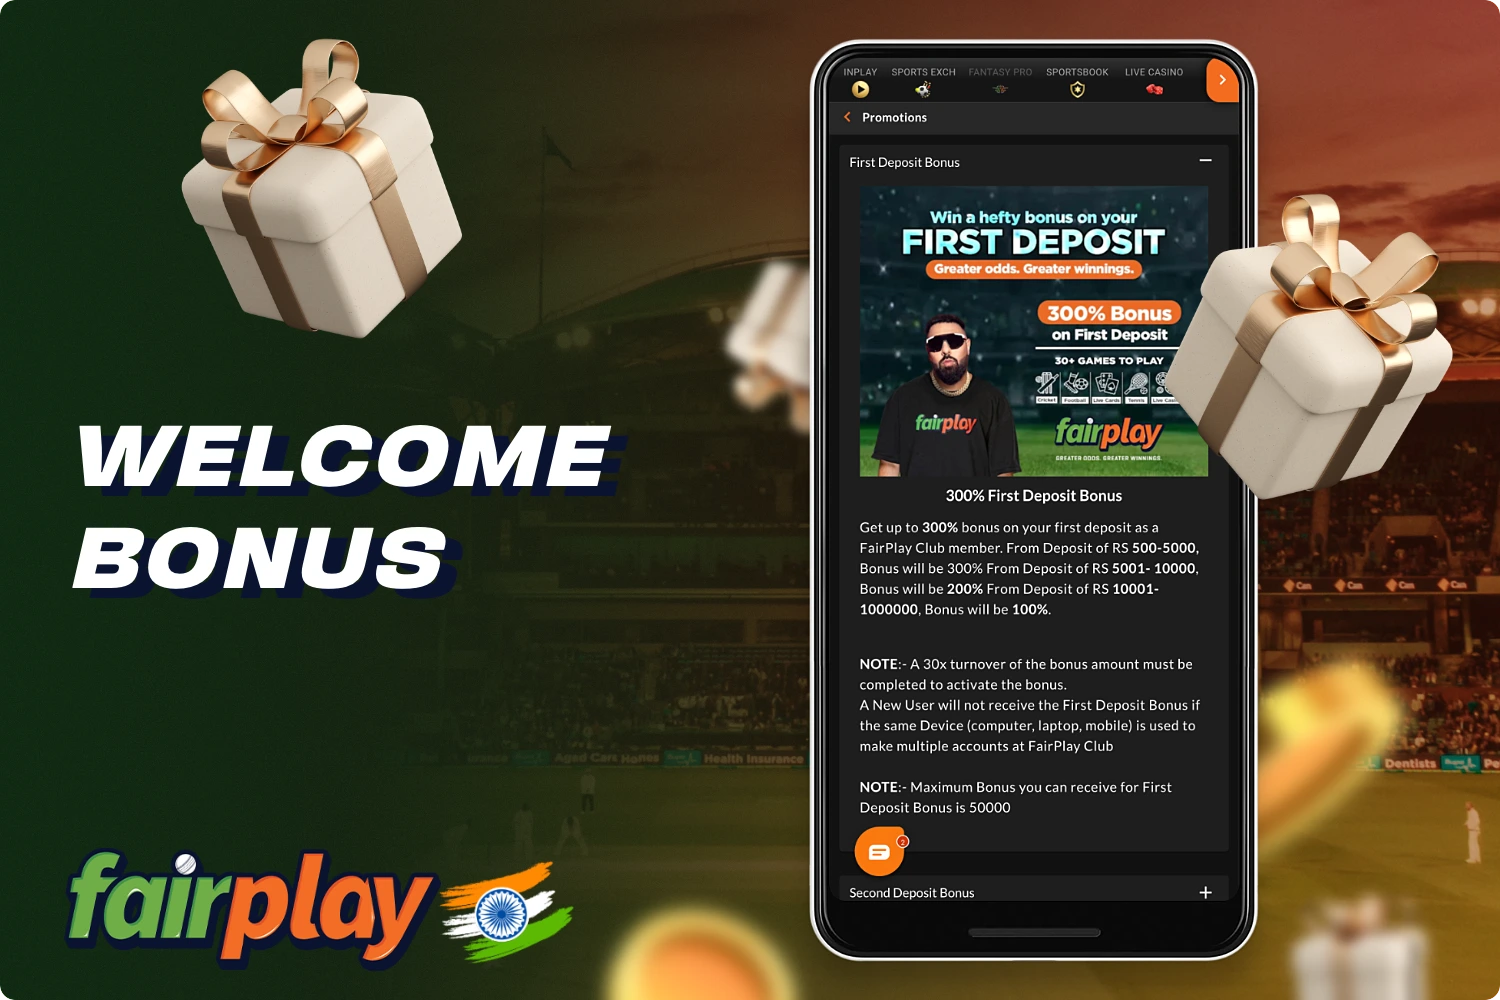 There is a welcome bonus for new users of the Fairplay mobile app